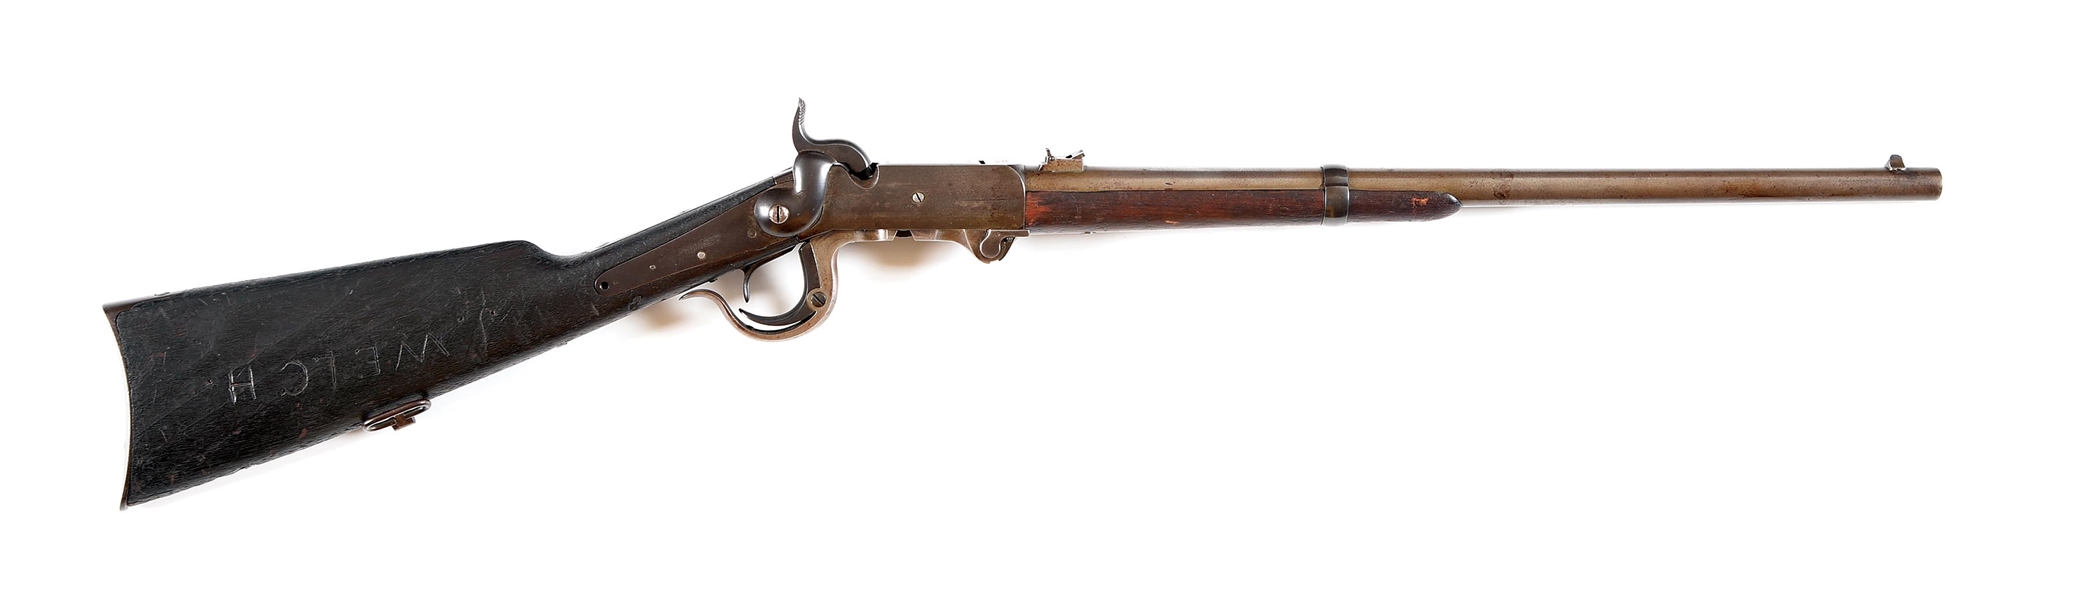 (A) IDENTIFIED CONFEDERATE CAPTURED BURNSIDE CARBINE OF JOHN L. WELCH, 2ND MARYLAND CAVALRY, CSA, CAPTURED AT THE BATTLE OF PIEDMONT.